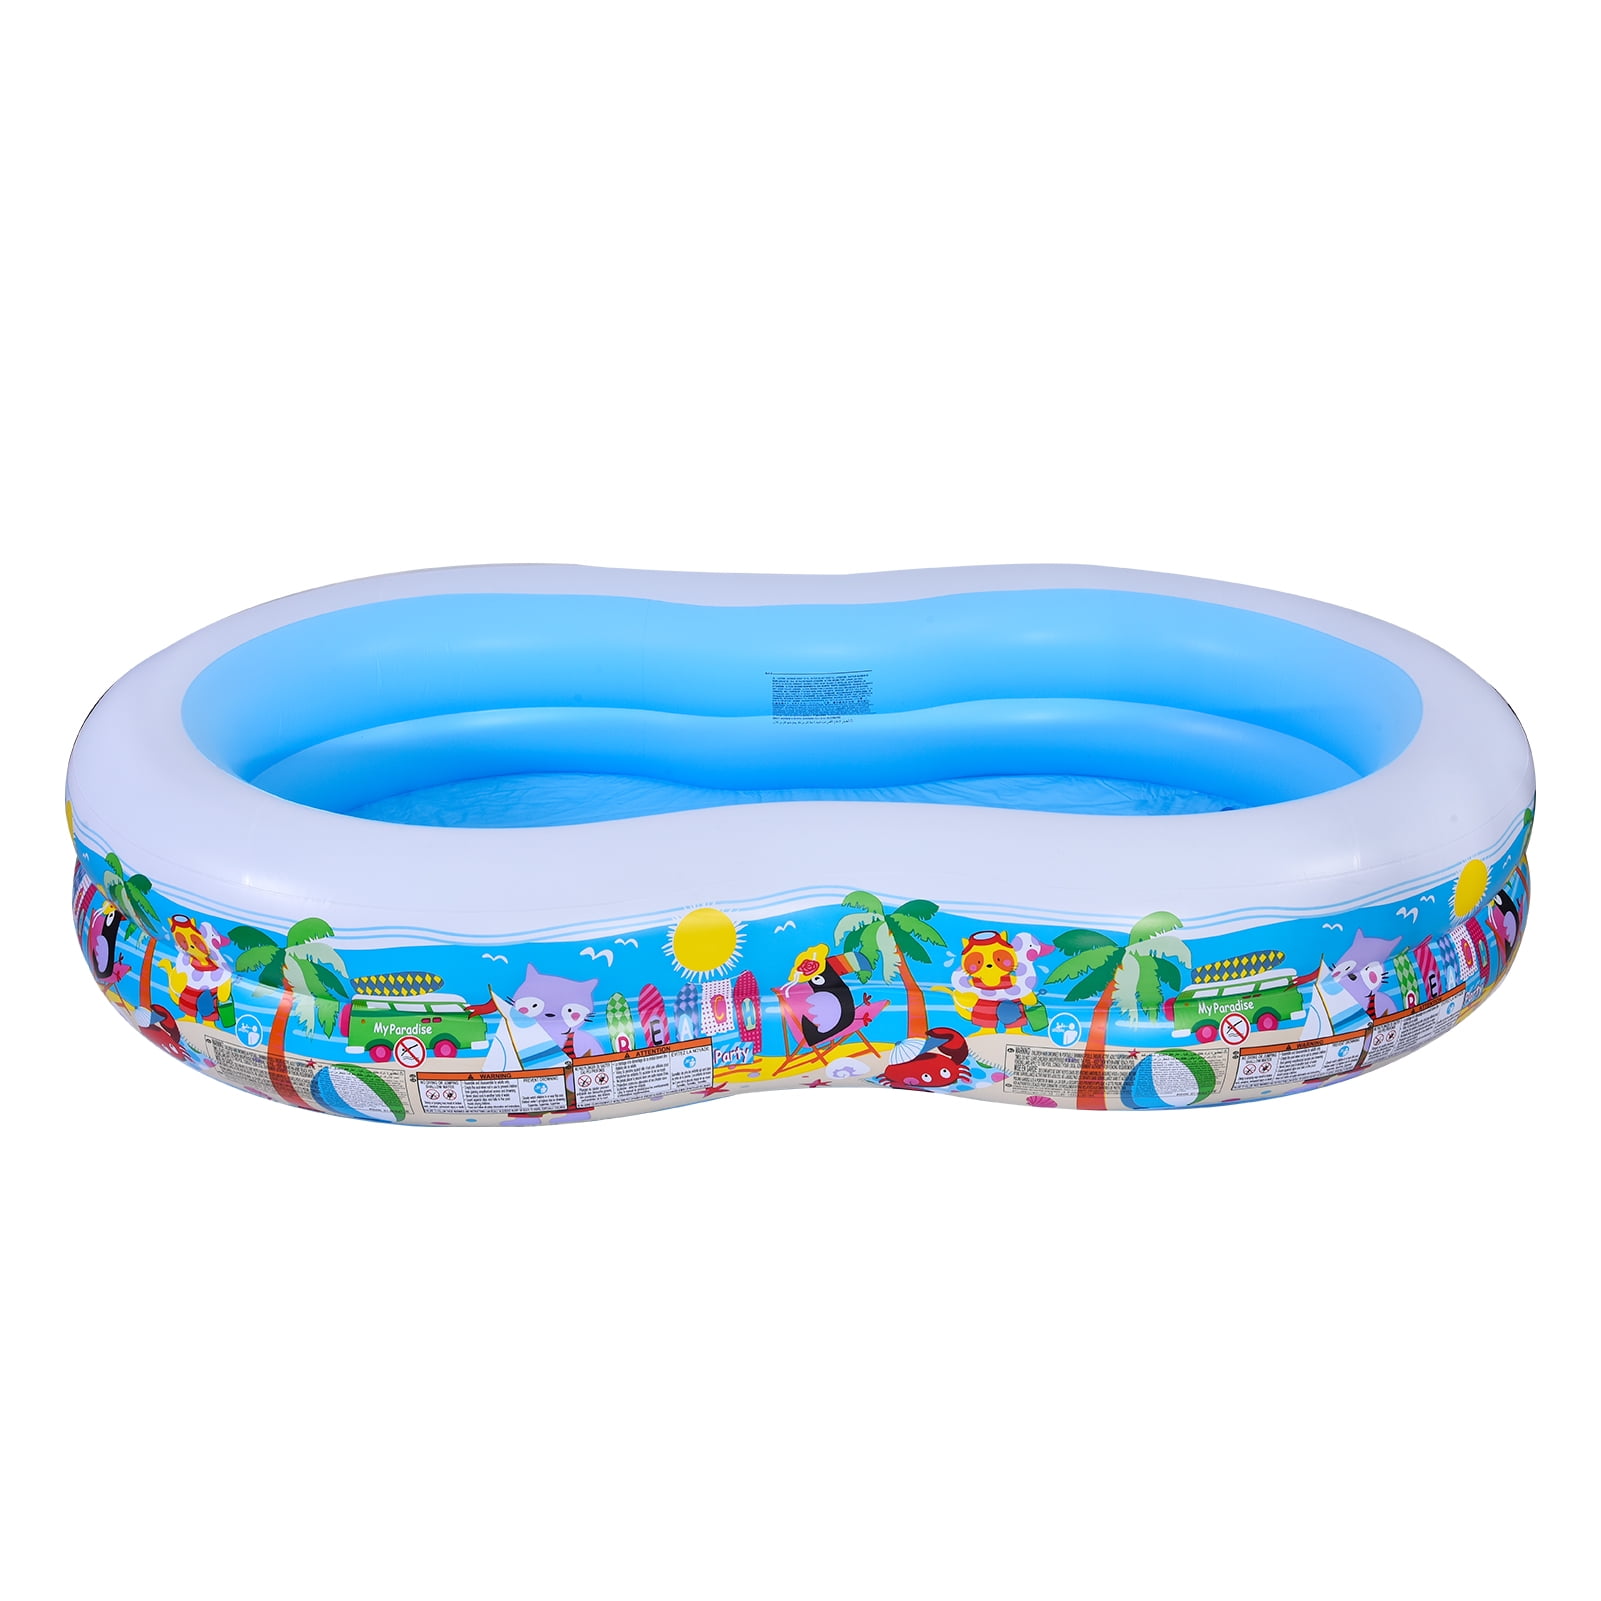 Inflatable Swimming Pool Unique Children Paddling Pool Water storage ...